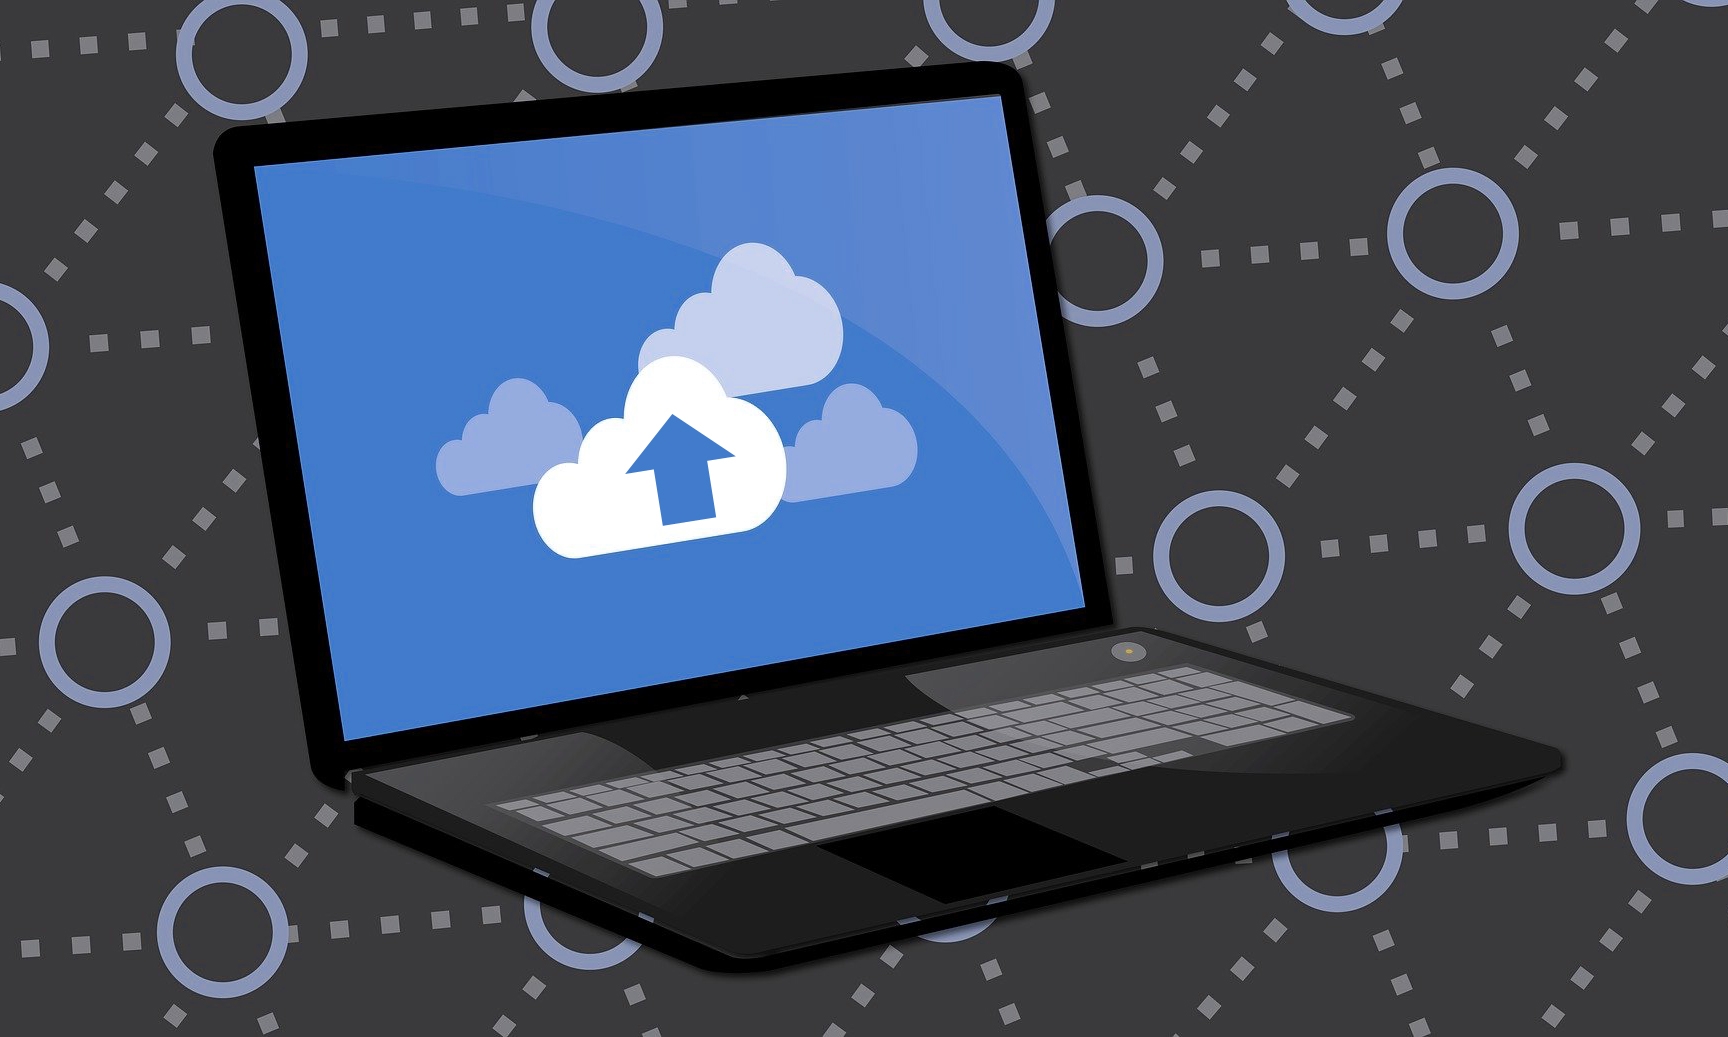 Illustration of Laptop with Cloud service